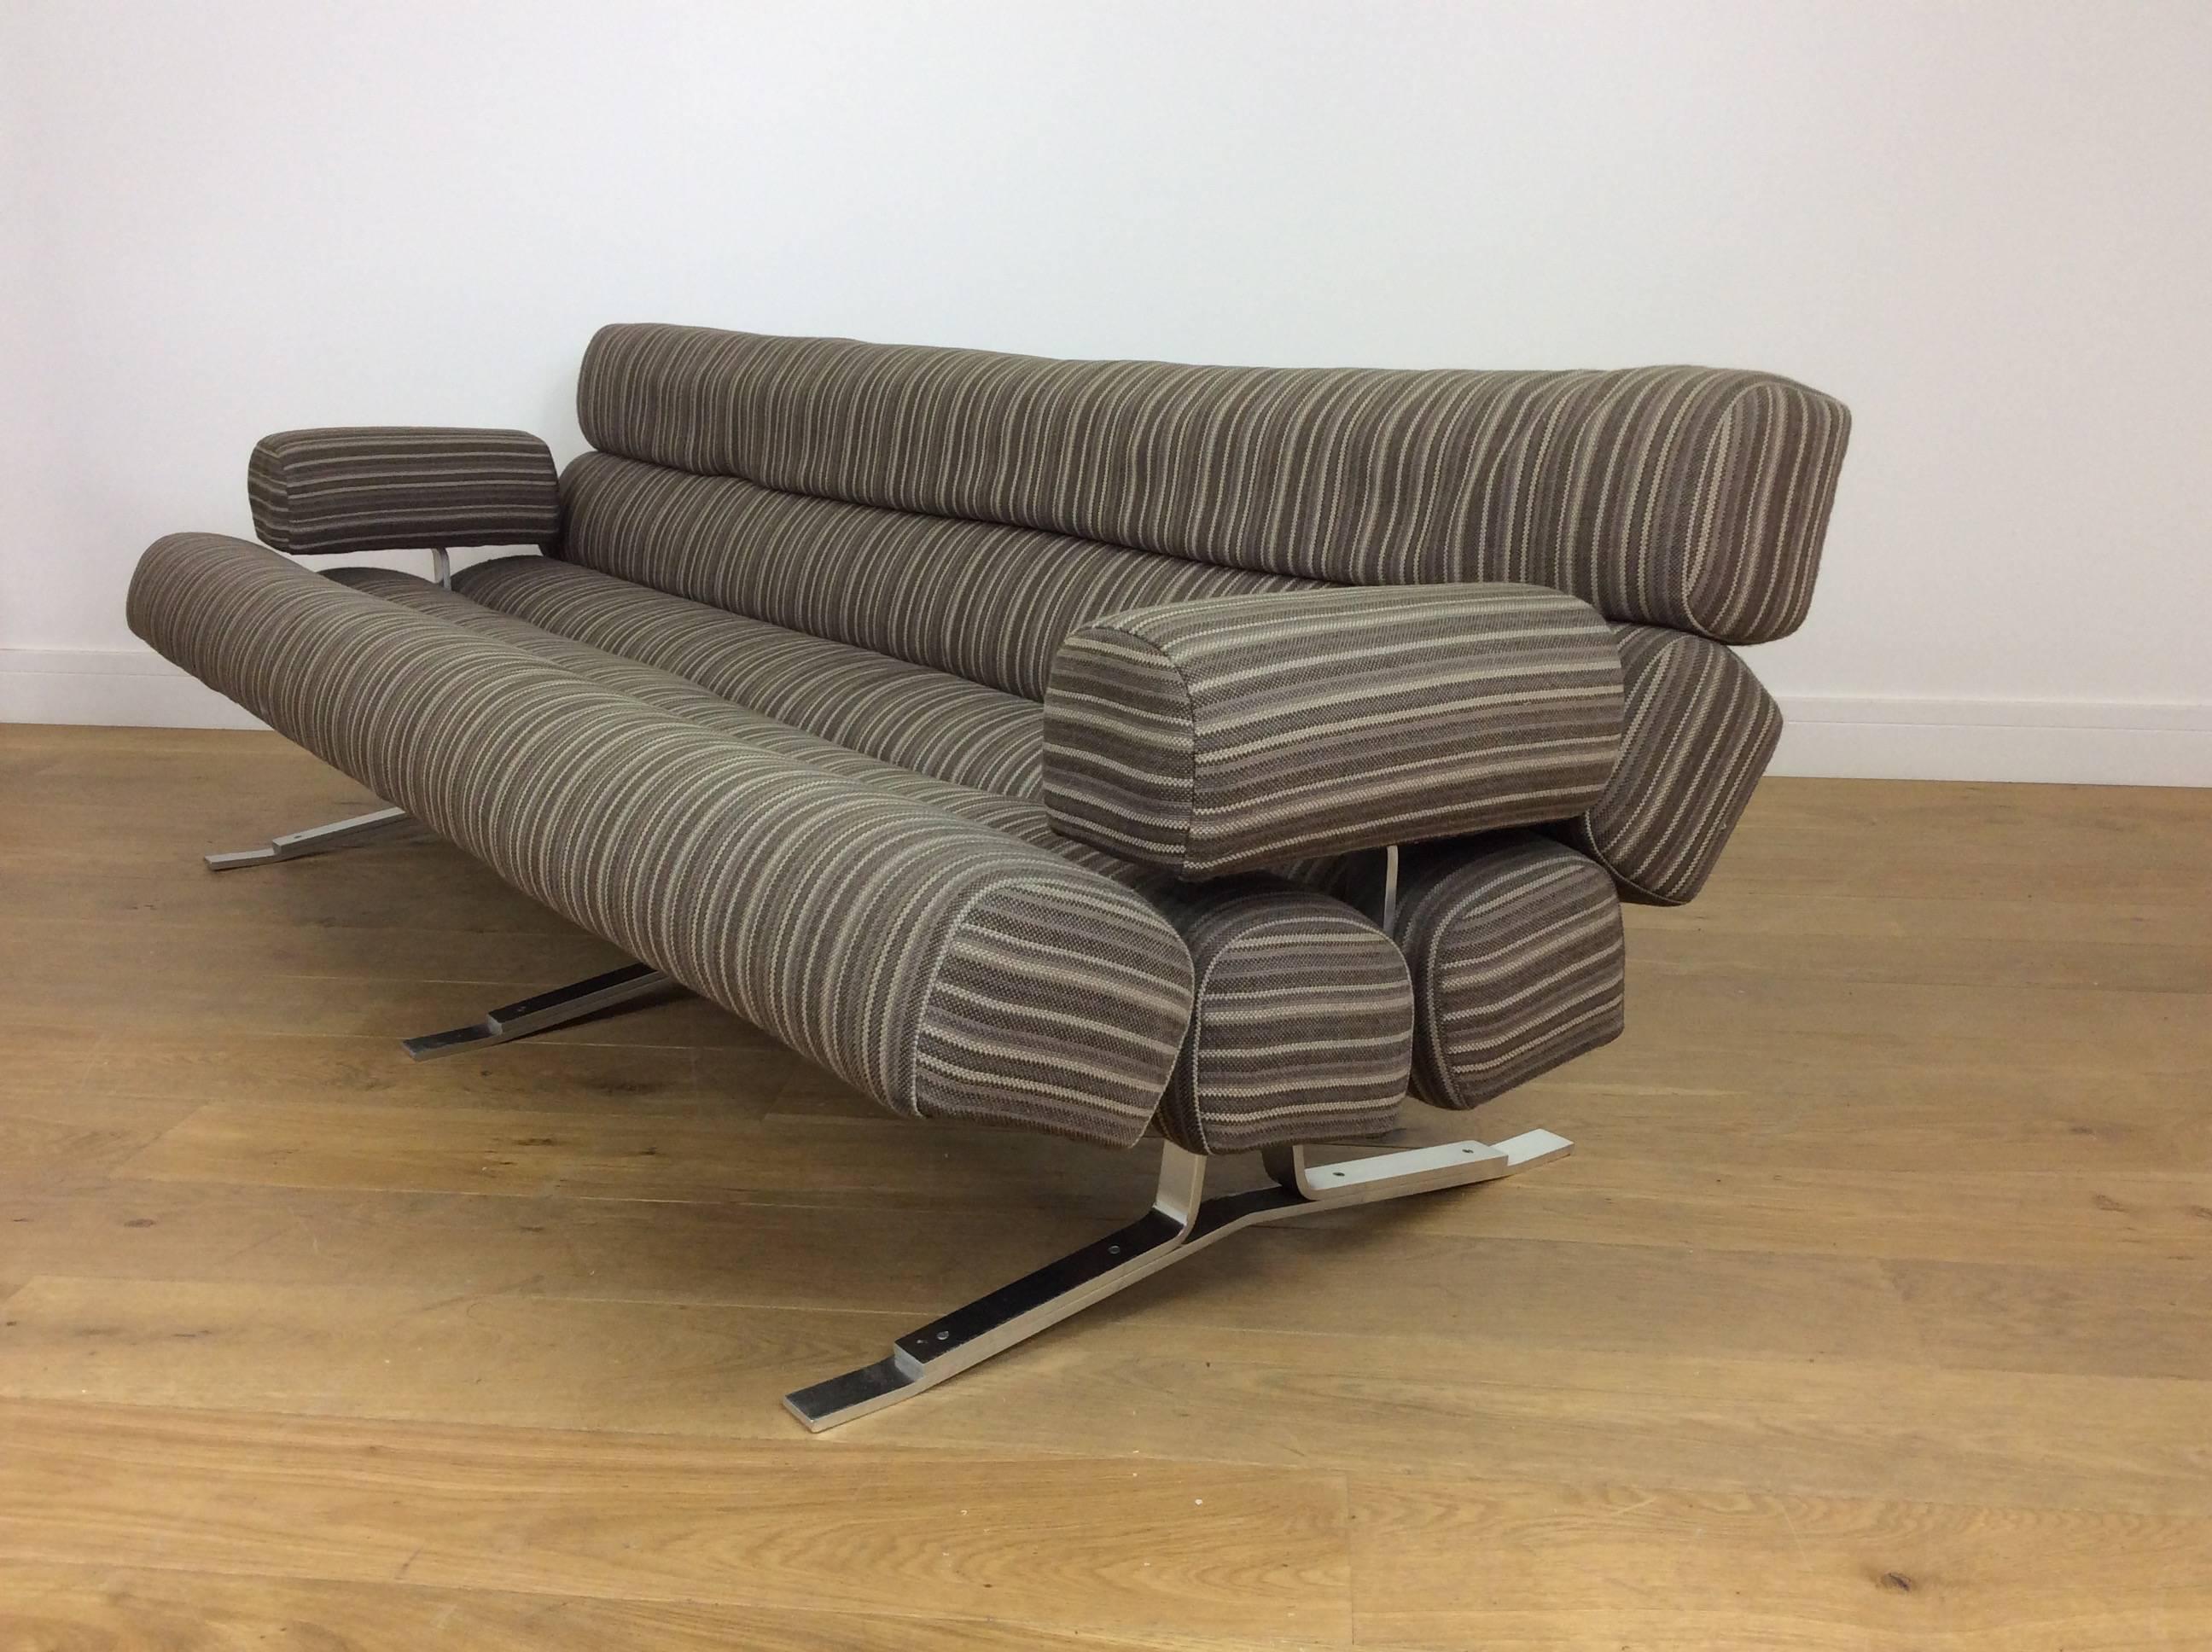 English Midcentury Sofa by William Plunkett Model, WP01 For Sale